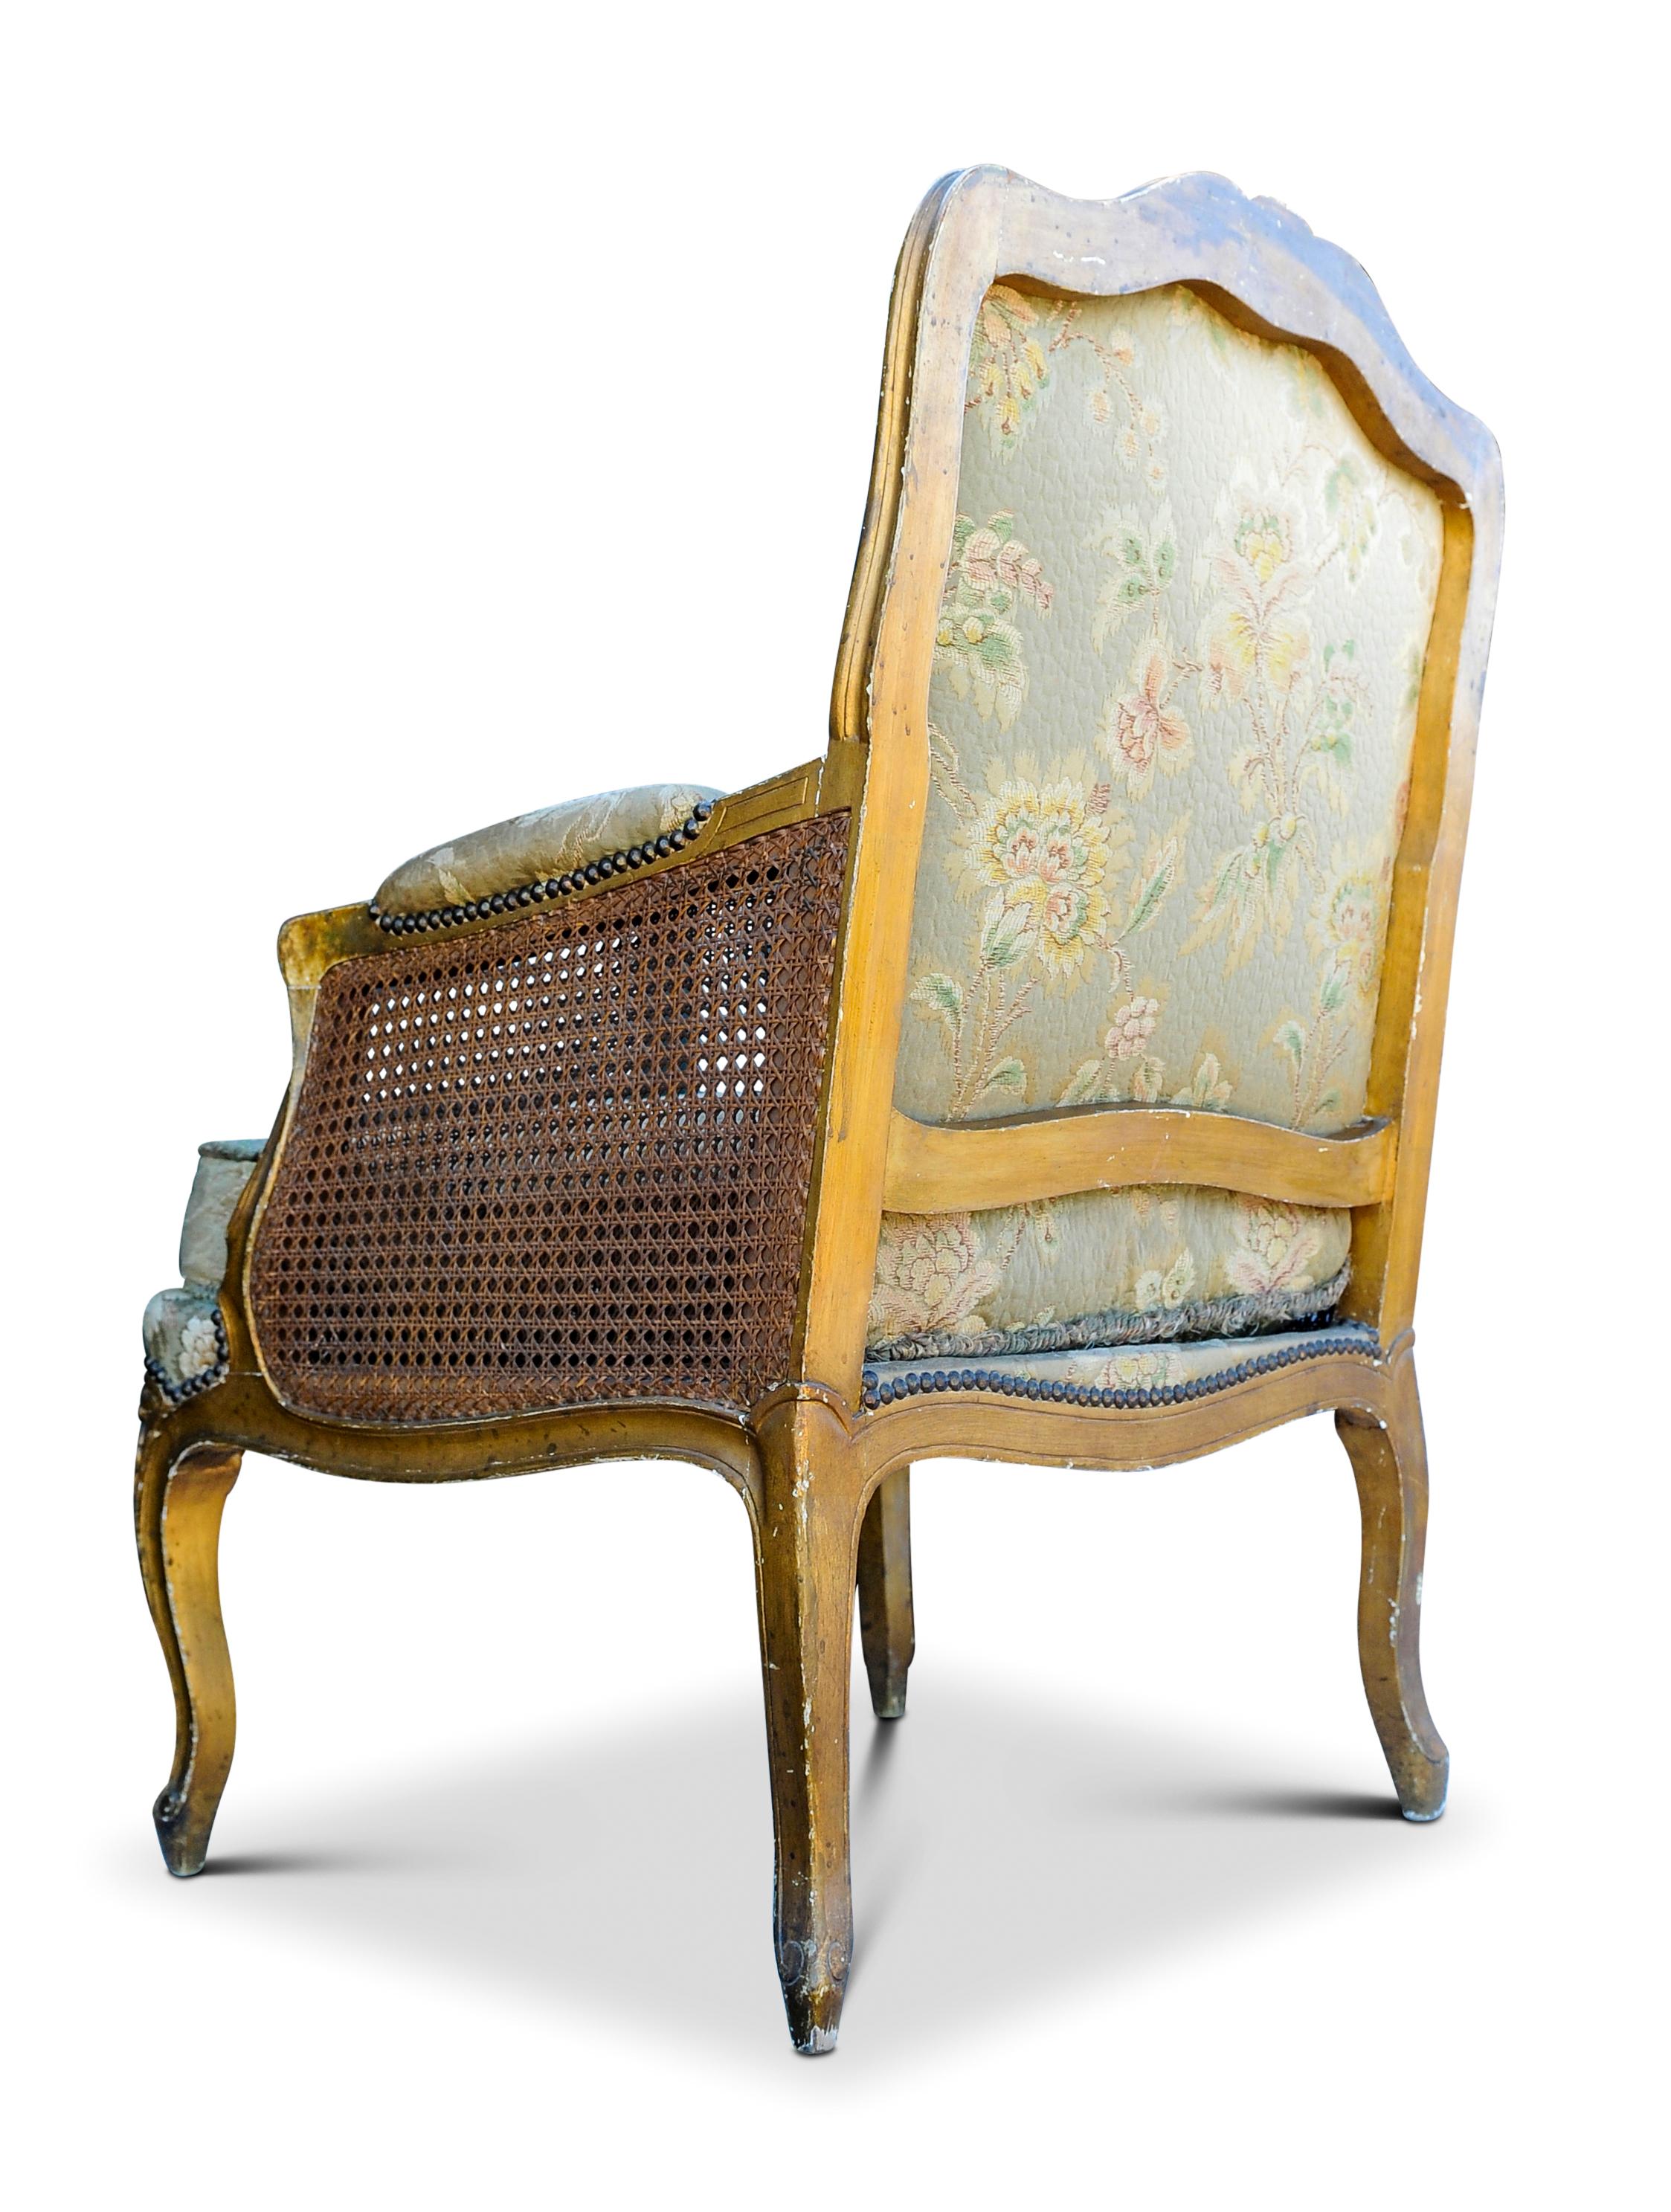 Hand-Crafted Antique 19th Century French Gilded Bergere Armchair with Stud Detailing For Sale